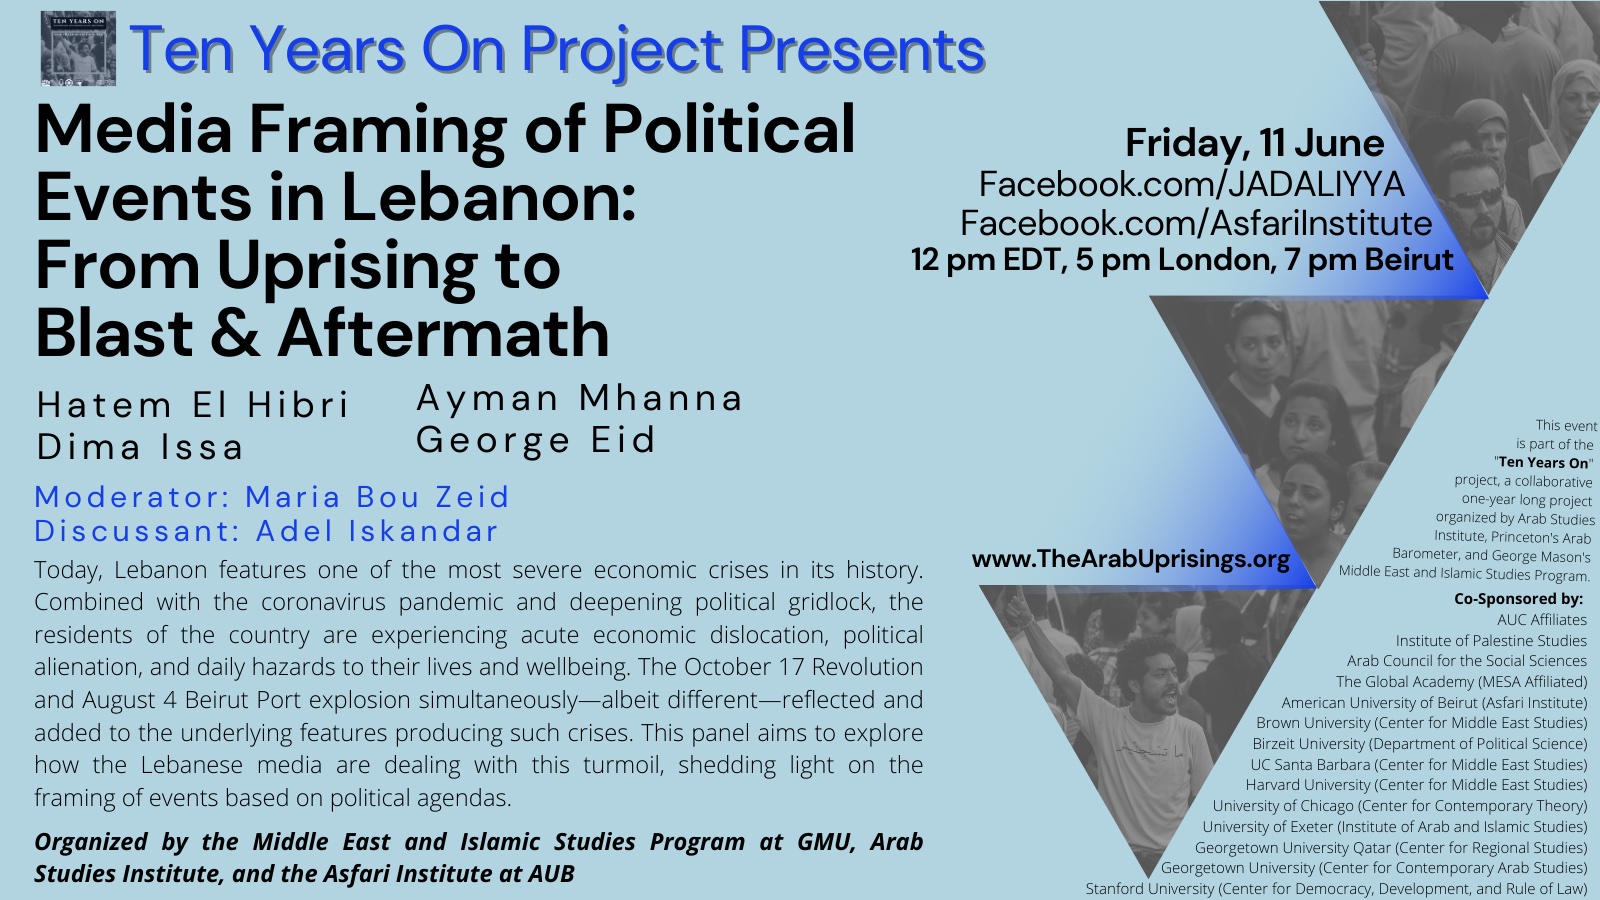 event flyer for Media Framing of Political Events in Lebanon